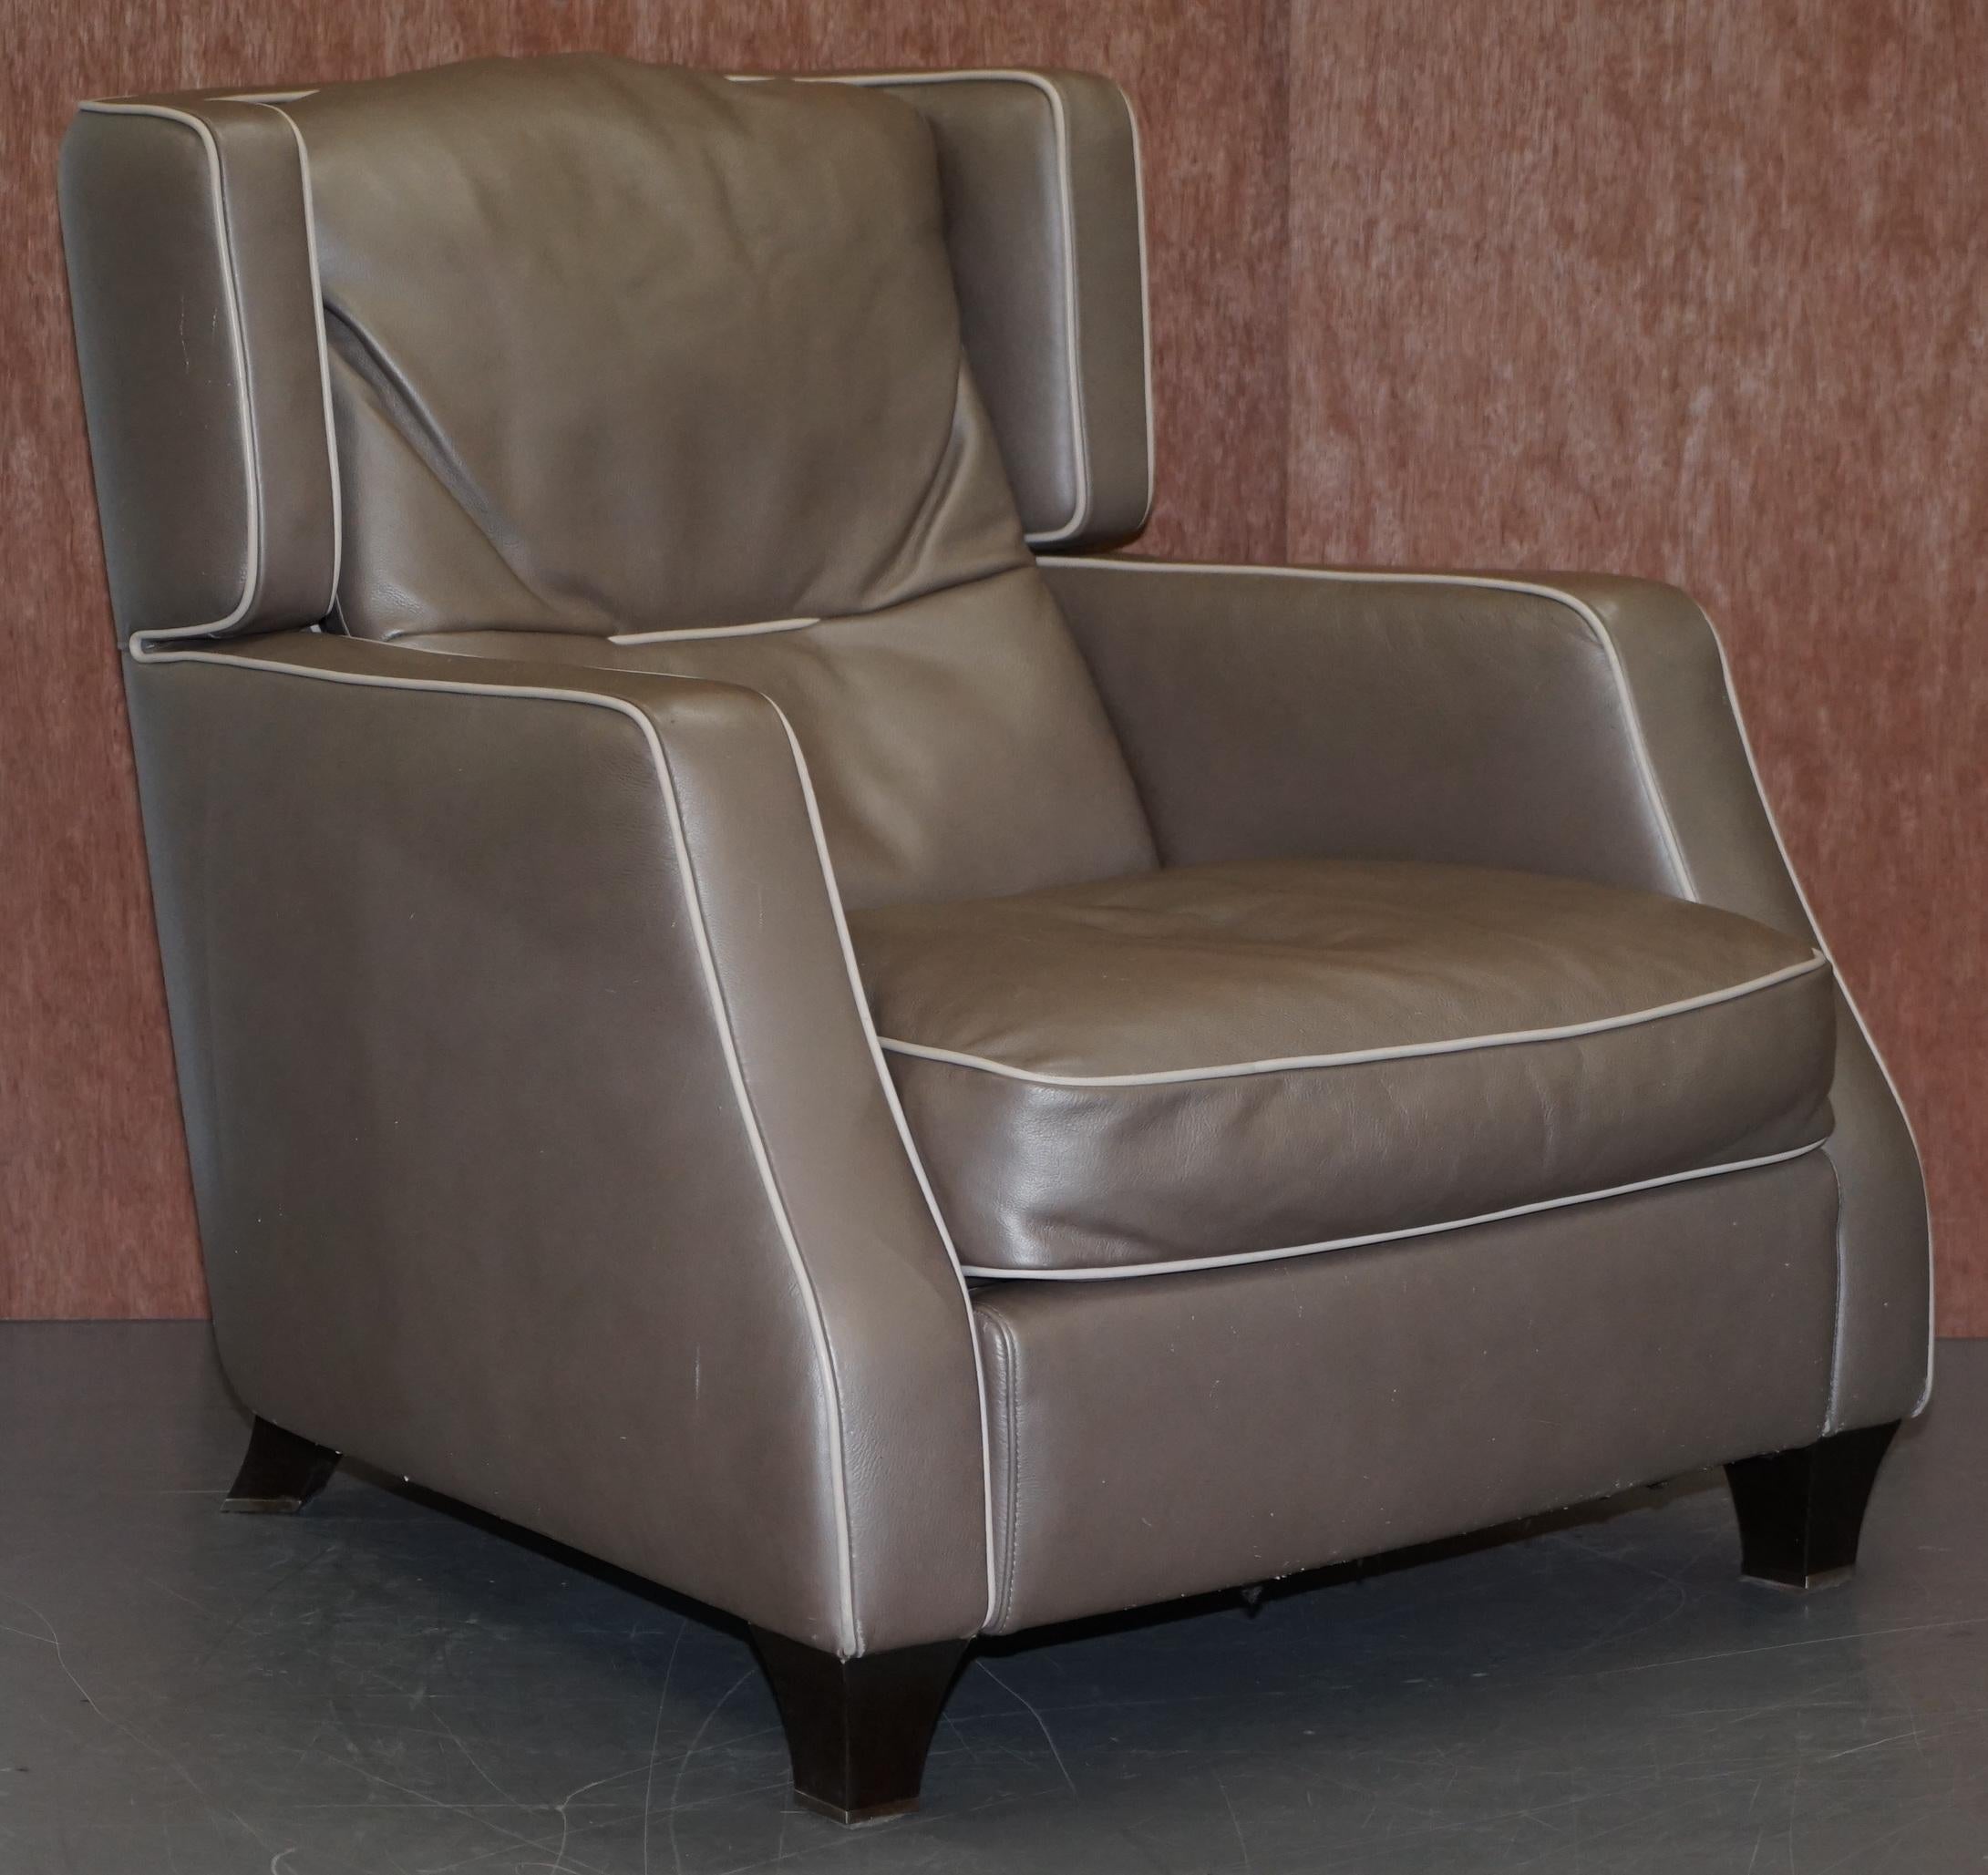 We are delighted to offer for sale this lovely original Natuzzi Italia Amadeus platinum grey leather armchair and matching ottoman footstool

Amadeus

A classic armchair design, with a slightly open base, a curvy shape and a soft enveloping